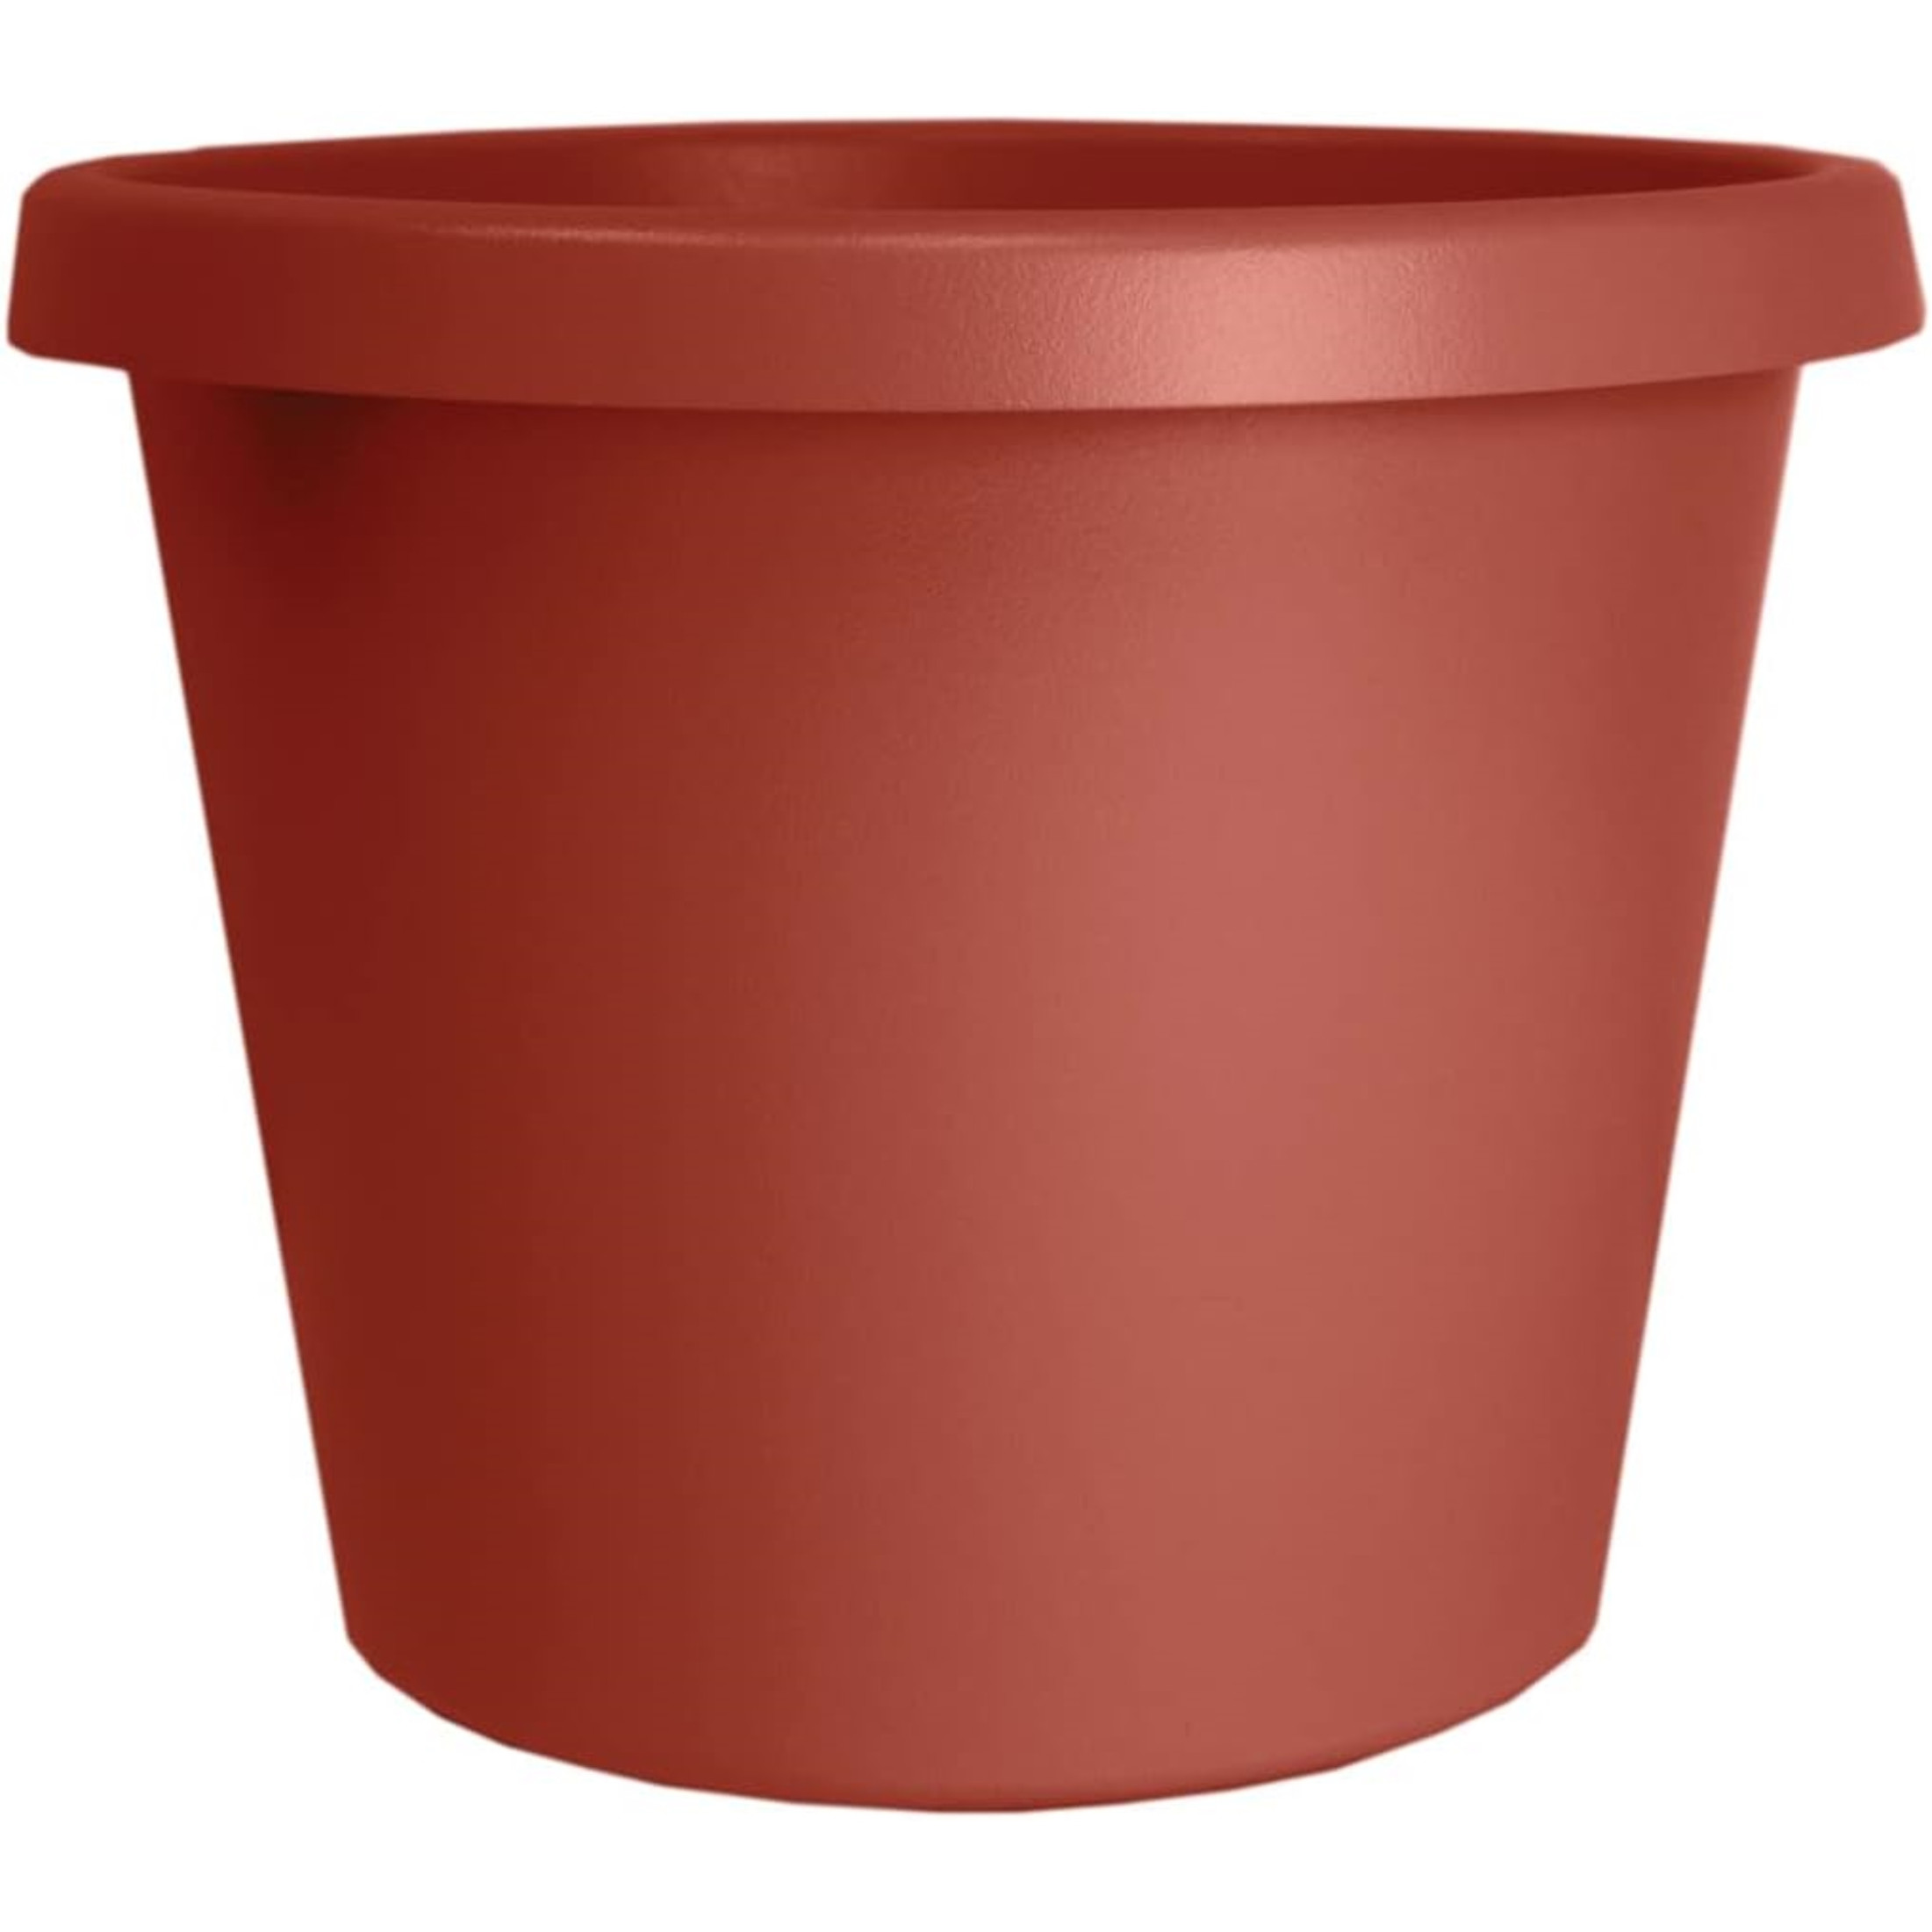 The HC Companies Indoor Outdoor Round Prima Plastic Planter Pot with Rolled Rim, Clay, 6"